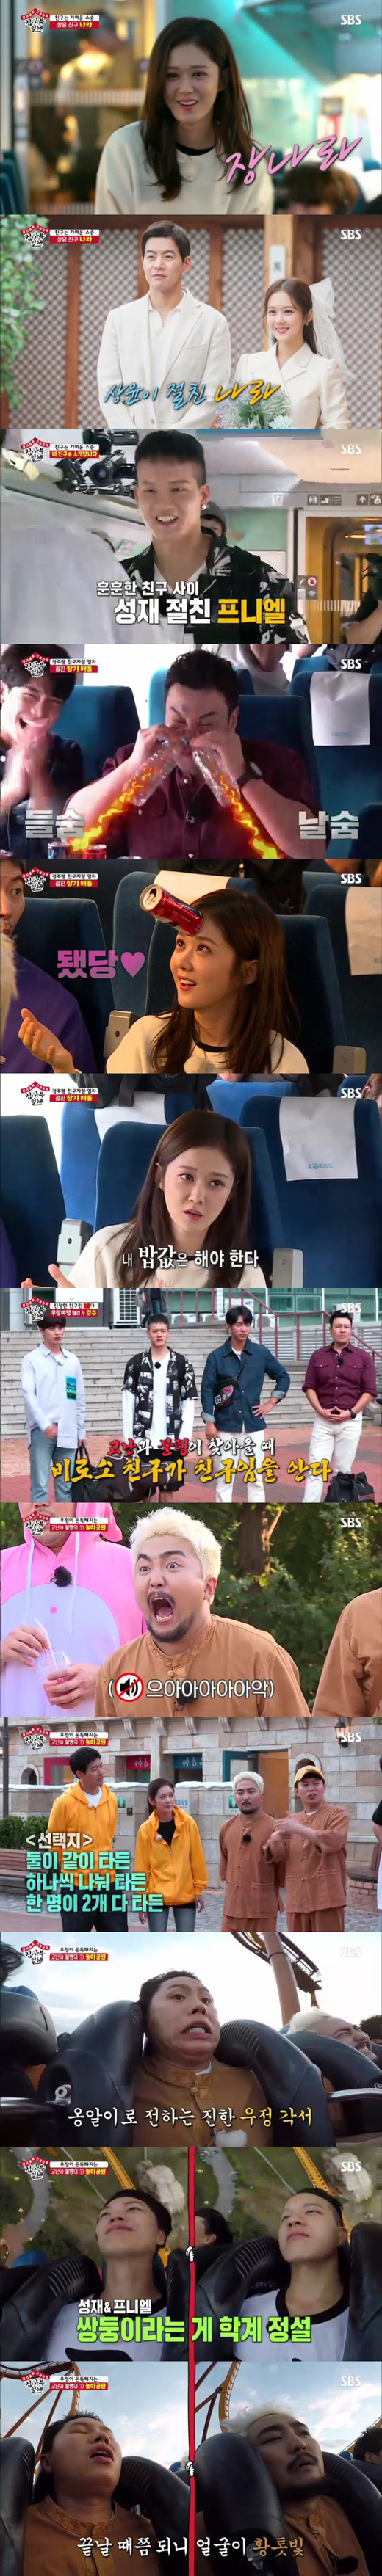 All The Butlers attracted the attention of viewers with a friendship travel special that can look back on the meaning of true Friend.According to Nielsen Korea, SBS All The Butlers furniture TV viewer ratings, which were broadcast on the 22nd, were 7.3% (hereinafter the second part of the metropolitan area), and 2049 target TV viewer ratings, which were collected for young viewers aged 20 to 49, were 3.7%.Top TV viewer ratings per minute soared to 8.4 percent, attracting attention.The broadcast was featured on the Friend Master special feature, and the moisturizing was drawn to travel to Gyeongju with the actors Lee Seung-gi, Lee Sang-yoon, comedian Yang Se-hyeong and the friends invited by singer Yook Sungjae.The members invited Friend, who had many things to learn most about each, to say of Friend, whom Lee Sang-yoon invited, The personality is not insane.I am serious, he said. I am a friend with a lot of talent in various fields.With the question of who the invited Friend would be, the actor Jang Na-ra, the friend of Lee Sang-yoon, first appeared and led the cheers of the members.Jang Na-ra said: I was a bit serious and uninterested, so I didnt do well with entertainment (Lee Sang-yoon) and told me not to worry.I said I would take care of everything. Then Jang Na-ra said to Lee Sang-yoon, who is breathing in the drama VIP scheduled to be broadcast, It feels like this boss on our team.I am doing my best and it is the funniest in our team. Followed by Friend Yoo Byung-jae of Yang Se-hyeong, Friend actor Shin Seung-Hwan of Lee Seung-gi, and Friend Bitoubi Peniel Shin of Yook Sungjae.Lee Seung-gi said that Shin Seung-Hwans advantage was a good catcher.Shin Seung-Hwan showed off his organs by blowing a PET bottle with his nose and attaching a can to his forehead as a nickname of Jung Seung-hwan.However, Yoo Byung-jae also easily blew a PET bottle with his nose, followed by Jang Na-ra, who succeeded in two organs and intercepted everyones applause.In the meantime, Jang Na-ra handed out his favorite snack, the sweetened jelly, to the members. Lee Sang-yoon added, I ate this only the day I filmed.Yoo Byung-jae asked, I have been around for nearly 20 years and I still feel nervous, and Jang Na-ra replied, The more you do, the worse you get.Lee Sang-yoon, who watched Jang Na-ra, said, Jang Na-ra is always very sorry when I NG, and Jang Na-ra said, I always think that I should pay for my rice and take responsibility.Jang Na-ra said, I will have the capacity and role I expect while casting, but I am always nervous that I will not be able to do it.The crew introduced the members and friends who arrived at the race to the Friend knows that Friend is Friend only when hardship and misfortune come of the proverb about Friend.The members were worried about the mission to be given in the future, and Yang Se-hyeong explained Dangers Chinese characters and said, It may be Danger or an opportunity.So lets think about friendship travel today and think about it in a good way. Since then, they have been wearing a couple of couples shared through friendship tests and visited the amusement park.The mission given at the amusement park was to share two pairs: Roller Coaster, which falls vertically to 90 degrees, and Roller Coaster, which is not foothold.Lee Seung-gi and Shin Seung-Hwan, who won the pre-game, were excluded from the boarding list, while Yook Sungjae and Peniel Shin, Yang Se-hyeong and Yoo Byung-jae decided to ride two Roller Coaster together.Meanwhile, Lee Sang-yoon said, In the Indian proverb, Friend is the one who goes with the sadness of Friend. He decided to ride two Roller Coaster alone on behalf of Jang Na-ra, who is highly afraid of heights.Instead, Lee Sang-yoon said, If you have a dance and a song after that, please do it instead, and Jang Na-ra responded happily.Following the warm scenes of the two Friends, the scene of Jang Na-ra singing his past hit song Sweet Dream was predicted, and this scene took the best one minute with 8.4% of the TV viewer ratings per minute, as it proved many peoples expectations for singer Jang Na-ra.